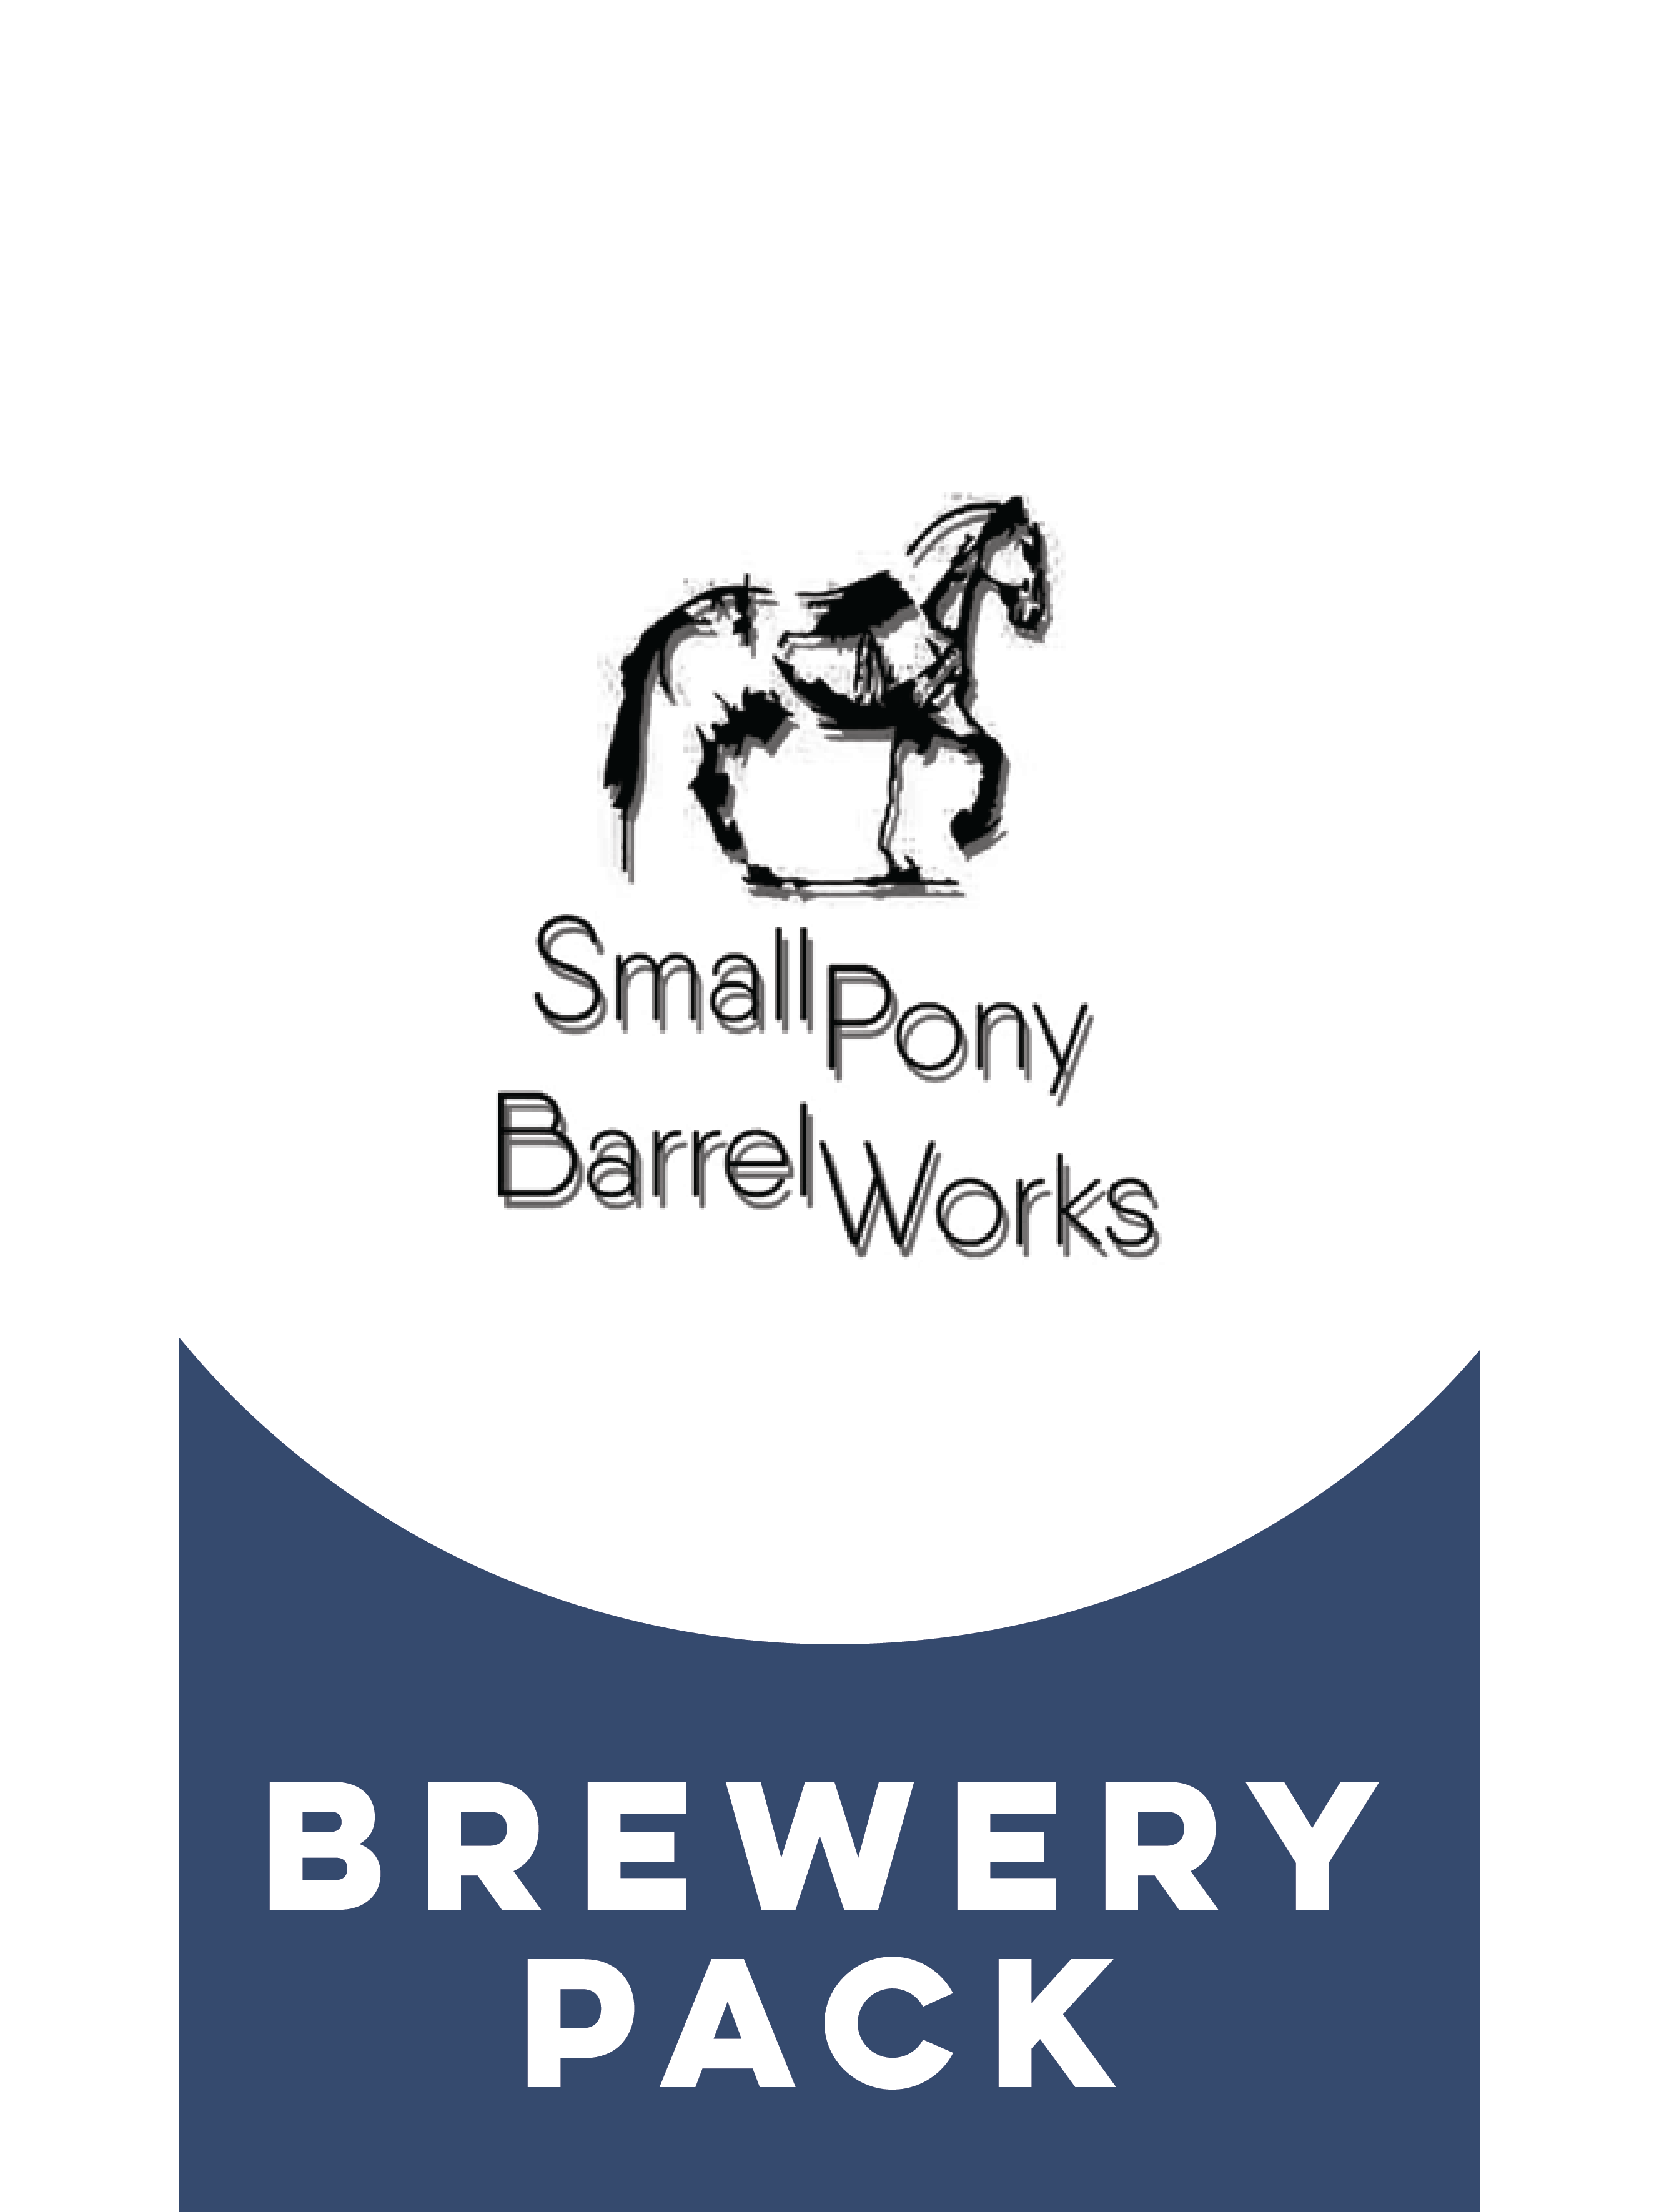 -Small Pony Barrel Works- Small Pony Brewery Pack-Packs & Cases- Only @ Beer Republic - The best online beer store for American & Canadian craft beer - Buy beer online from the USA and Canada - Bier online kopen - Amerikaans bier kopen - Craft beer store - Craft beer kopen - Amerikanisch bier kaufen - Bier online kaufen - Acheter biere online - IPA - Stout - Porter - New England IPA - Hazy IPA - Imperial Stout - Barrel Aged - Barrel Aged Imperial Stout - Brown - Dark beer - Blond - Blonde - Pilsner - Lager 